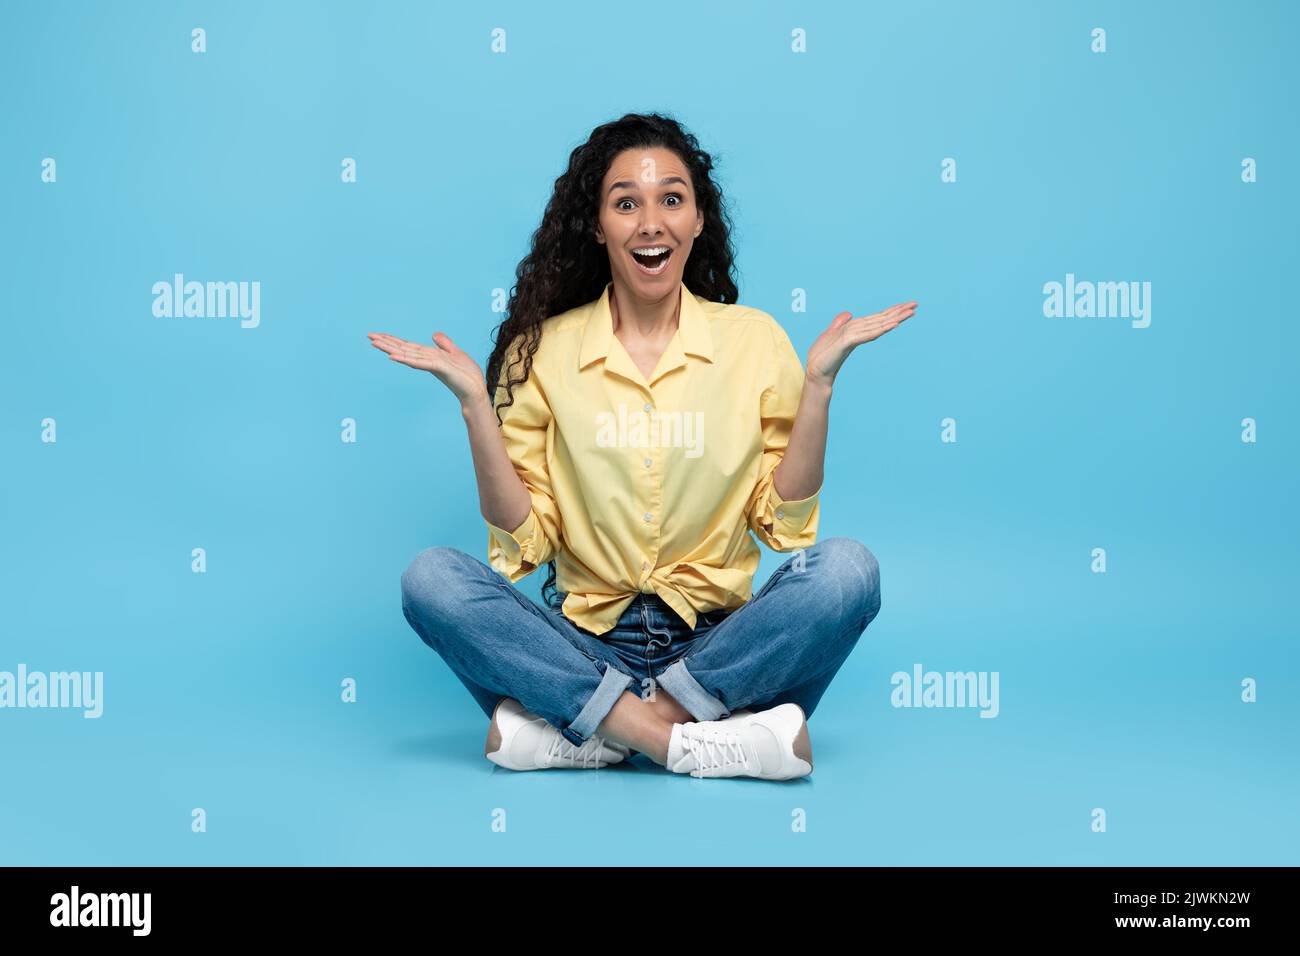 Puzzled excited young woman shrugging shoulders and smiling at camera on blue studio background, full length Stock Photo